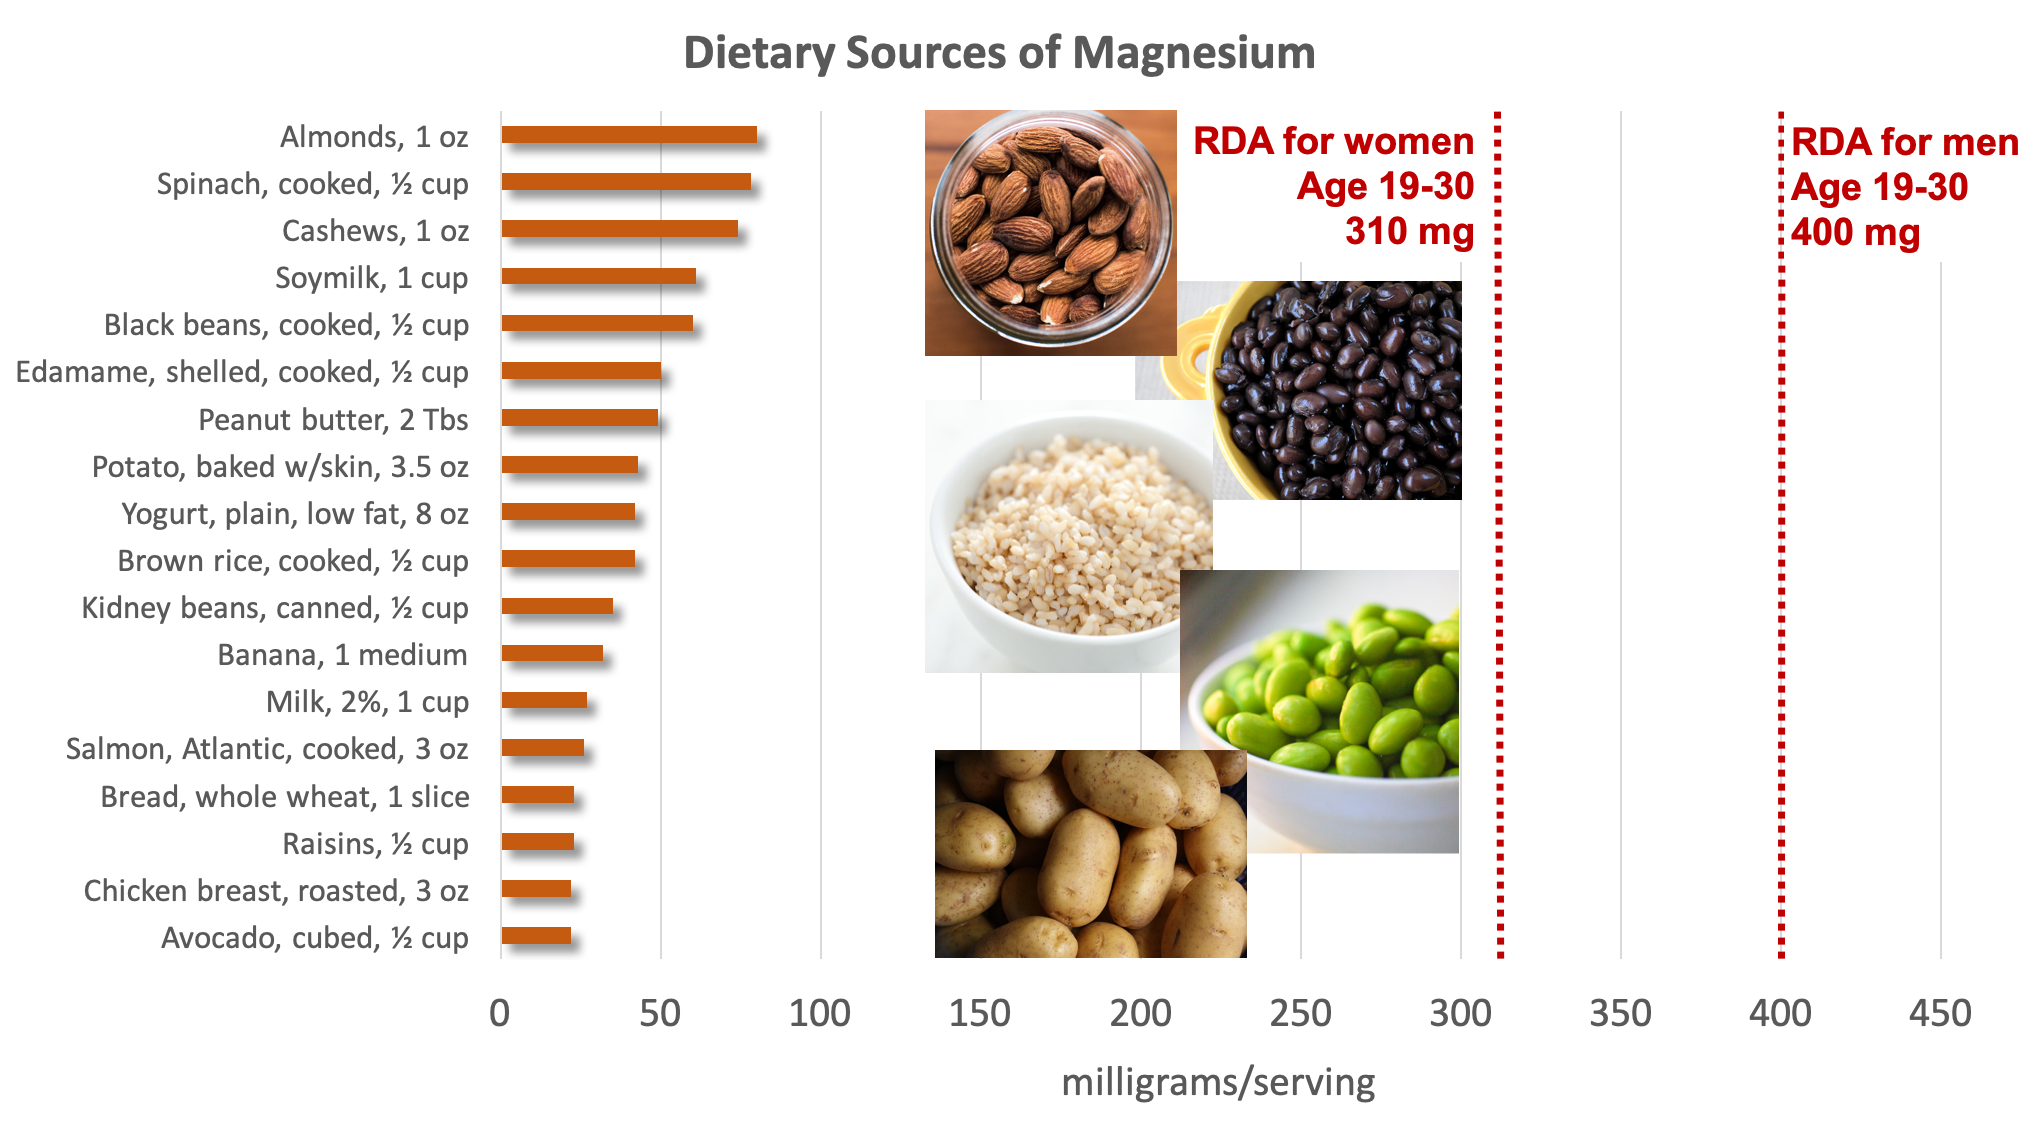 Bar graph showing dietary sources of magnesium compared with the RDA of 310 mg for women aged 19-30 and 400 mg for men aged 19-30. Top sources include nuts, leafy greens, soybeans and soymilk, beans, whole grains, potatoes, banana, milk, and fish. Food sources pictured include almonds, black beans, brown rice, edamame, and potatoes.